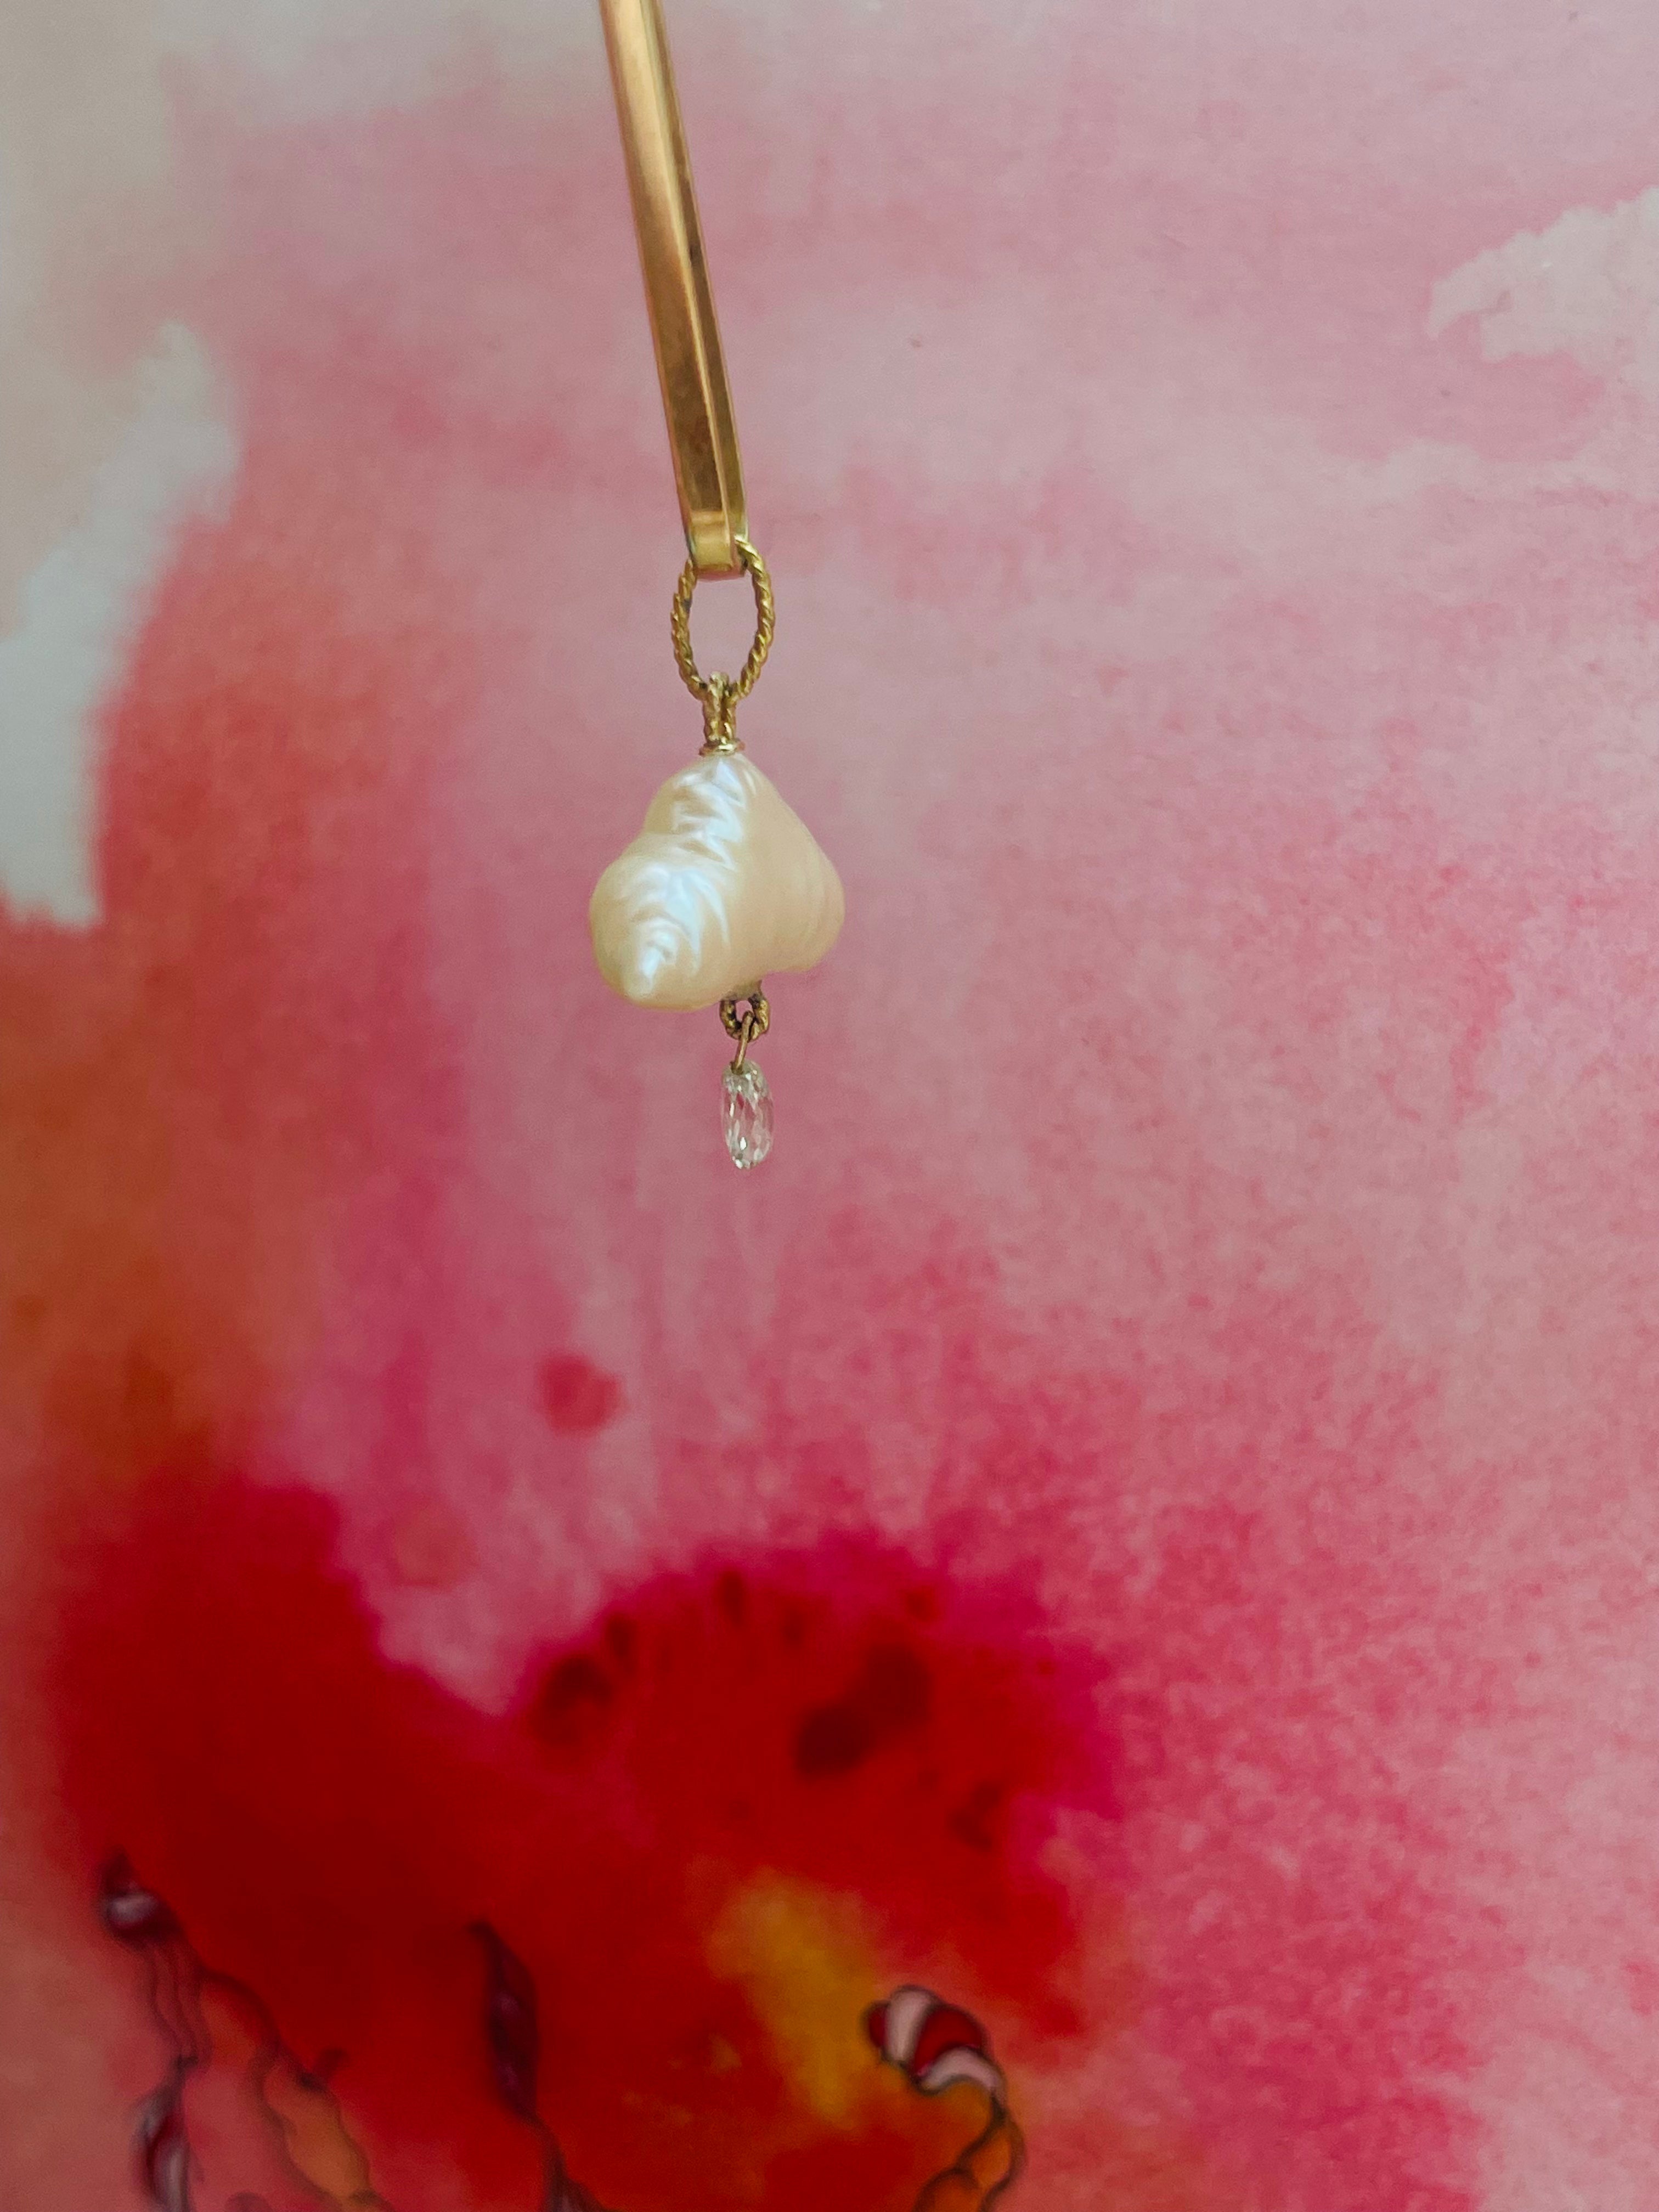 Japanese Pearl and Briolette Diamond Cloud Charm